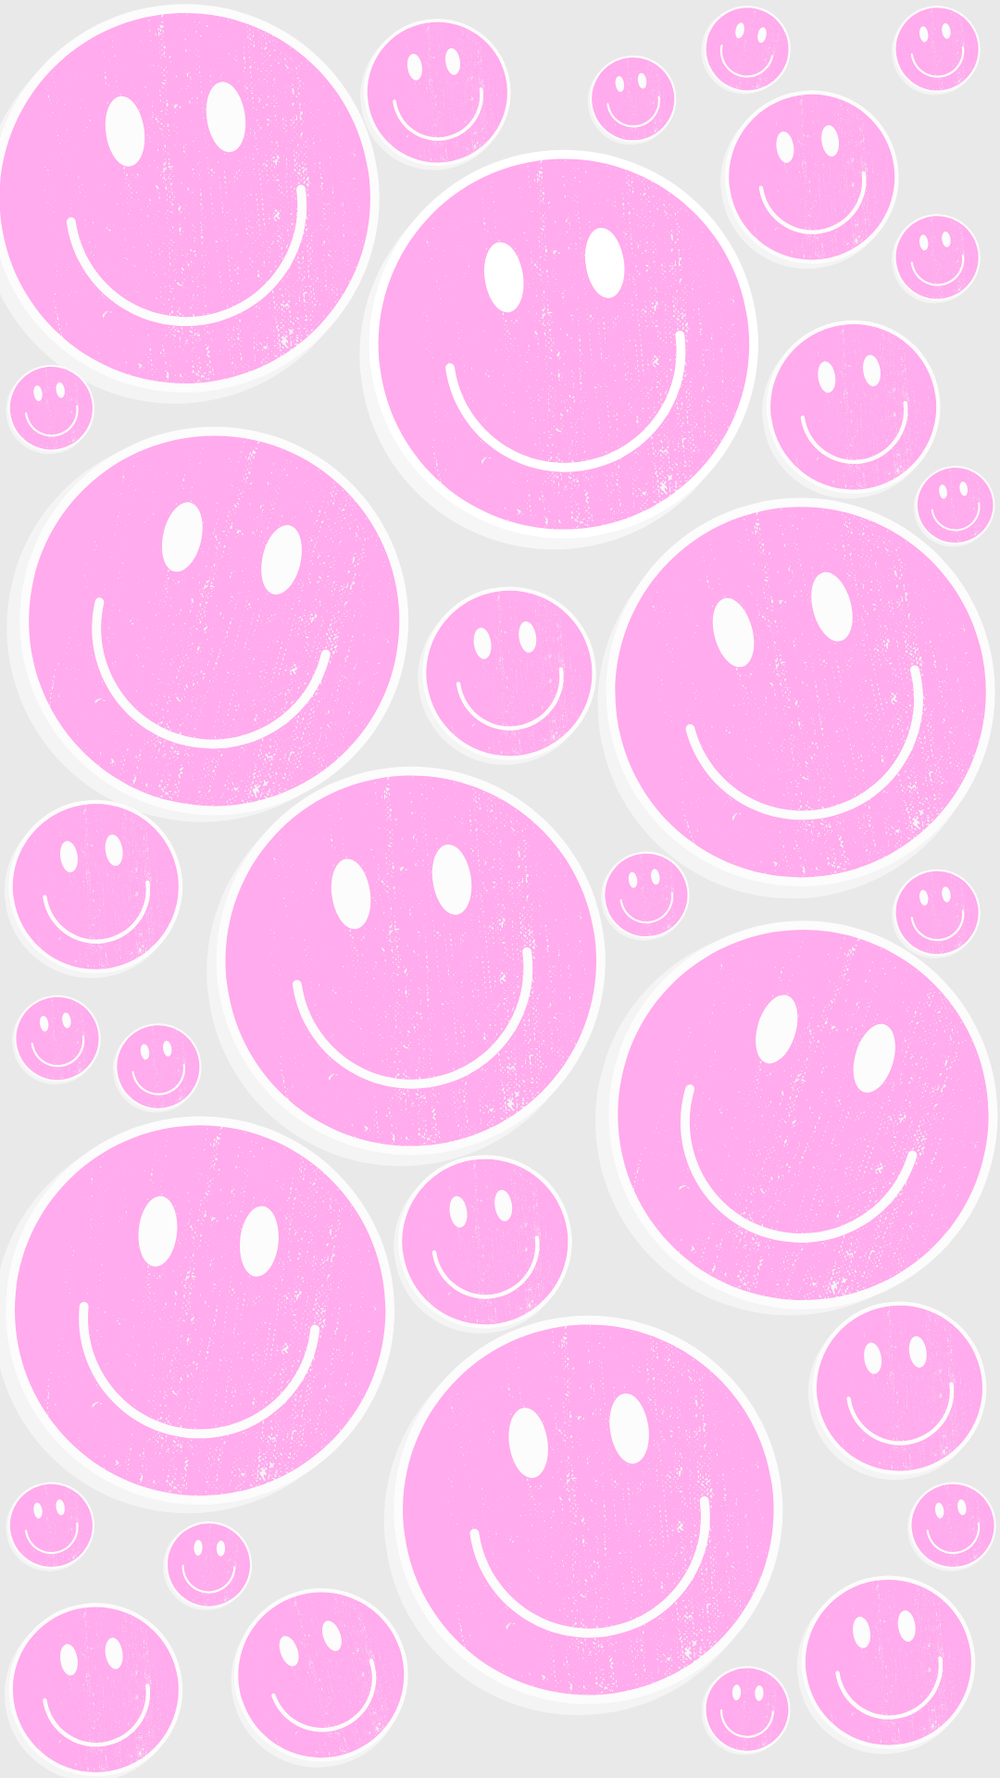 Pink Smiley Face iPhone Wallpaper